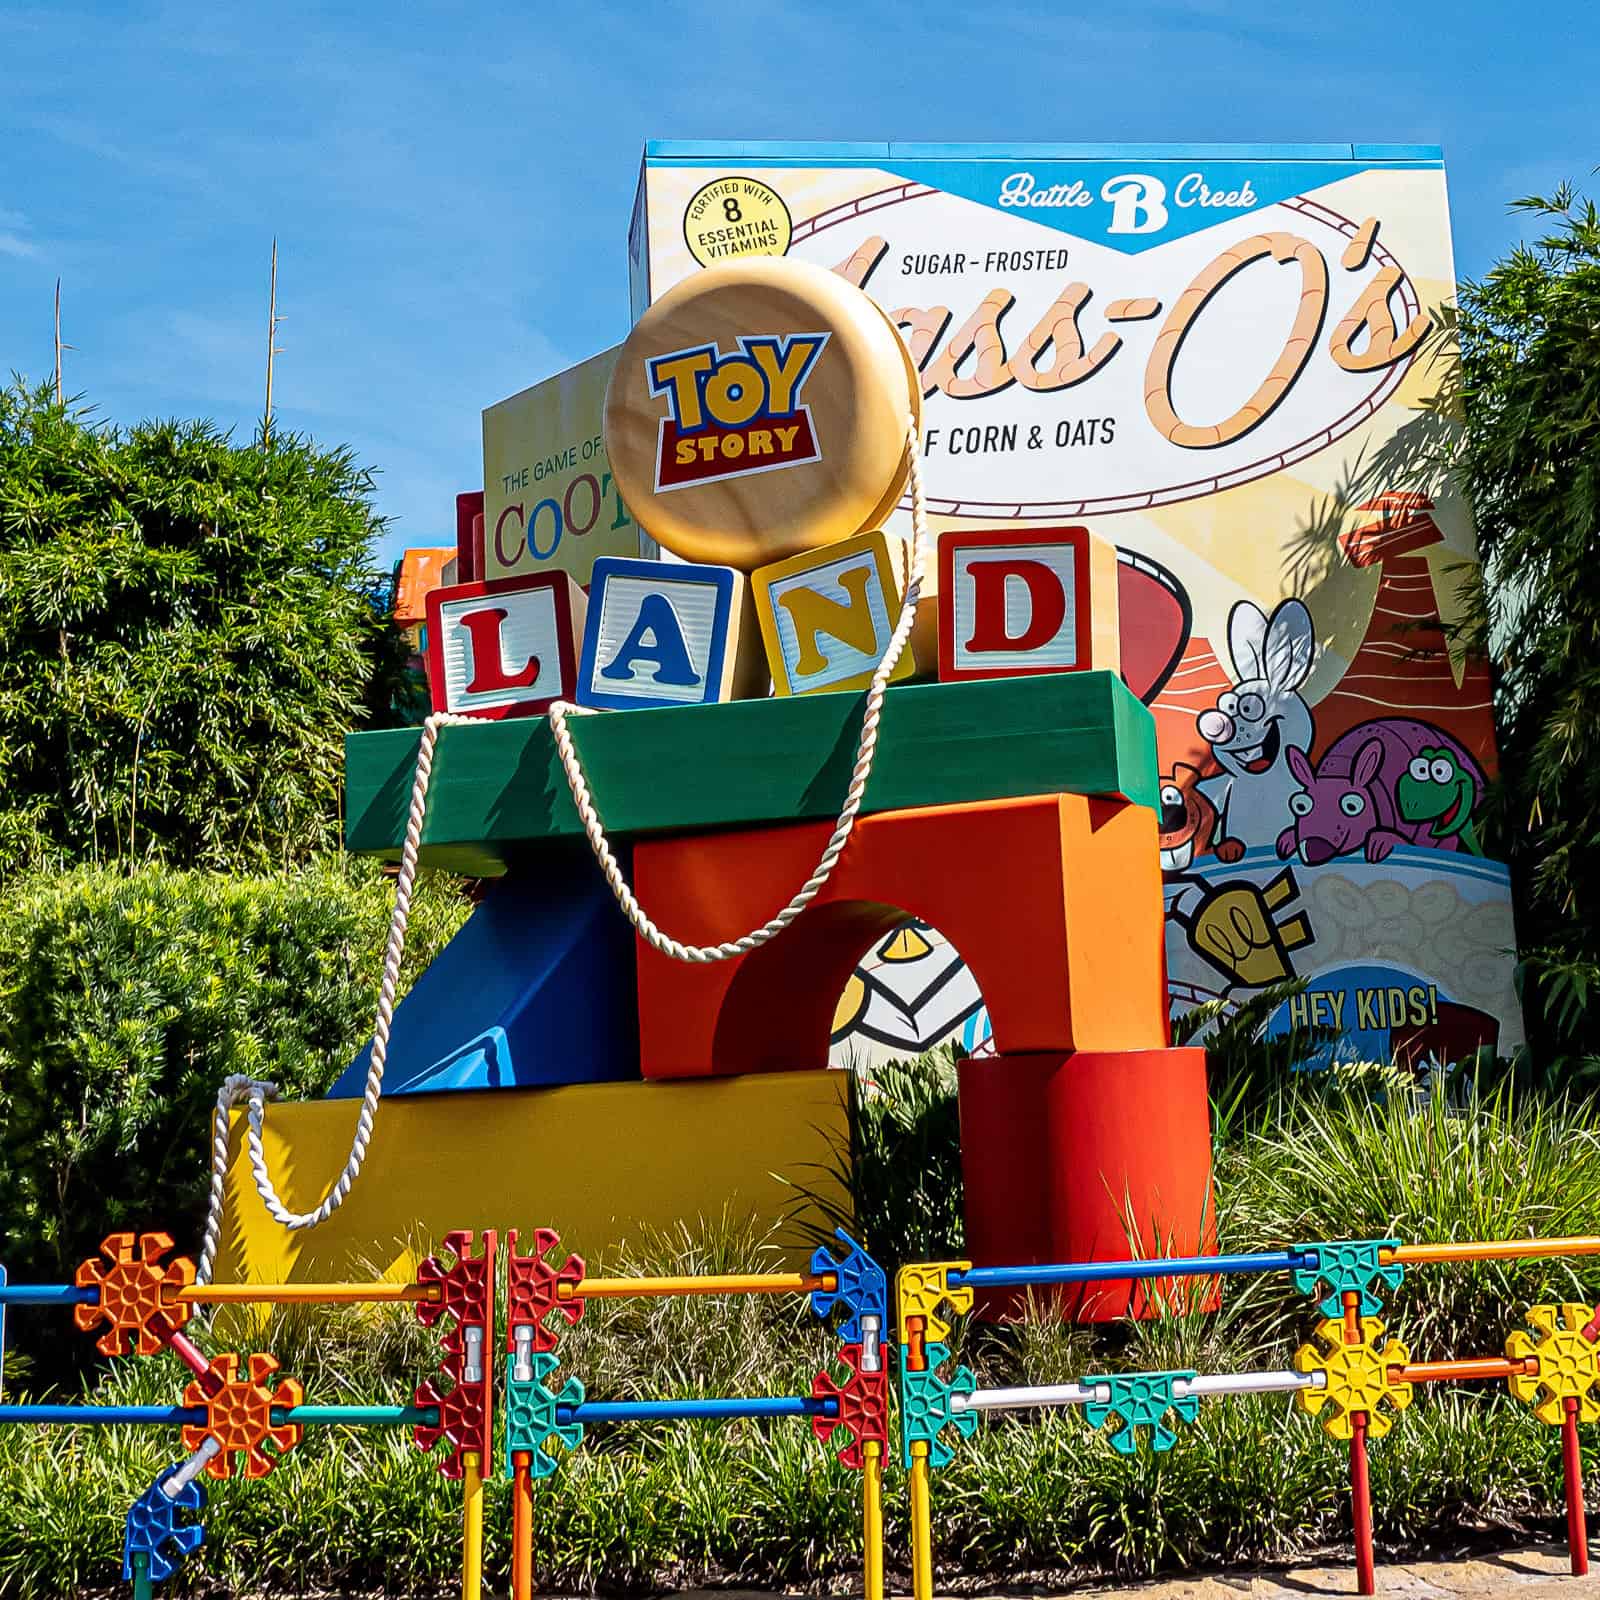 New Restaurant Disney World Location for Roundup Rodeo BBQ in Toy Story Land Hollywood Studios